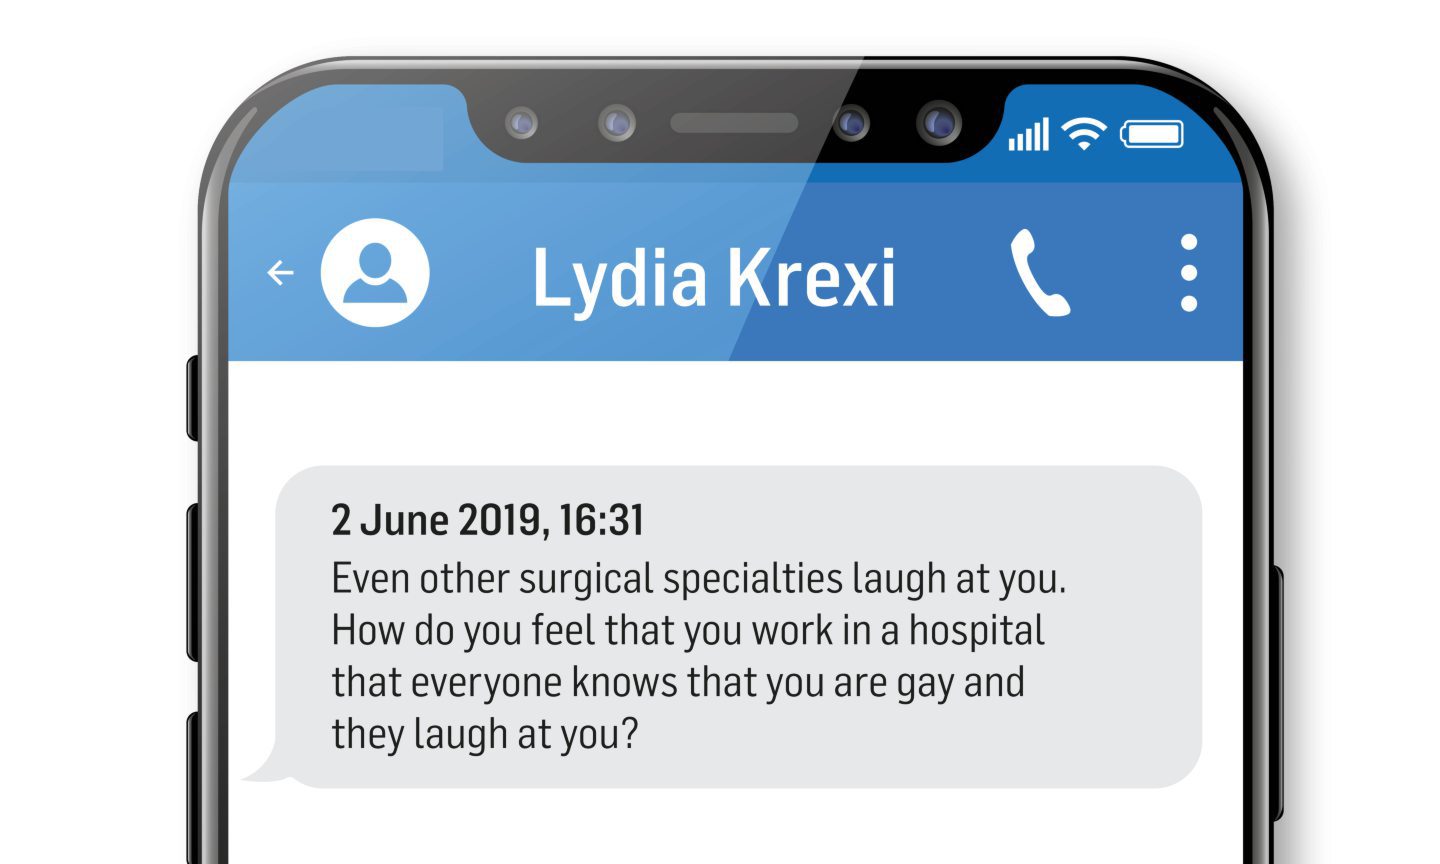 One of the texts from Lydia Krexi: "Even other surgical specialties laugh at you. How do you feel that you work in a hospital that everyone knows you are gay and they laugh at you?"